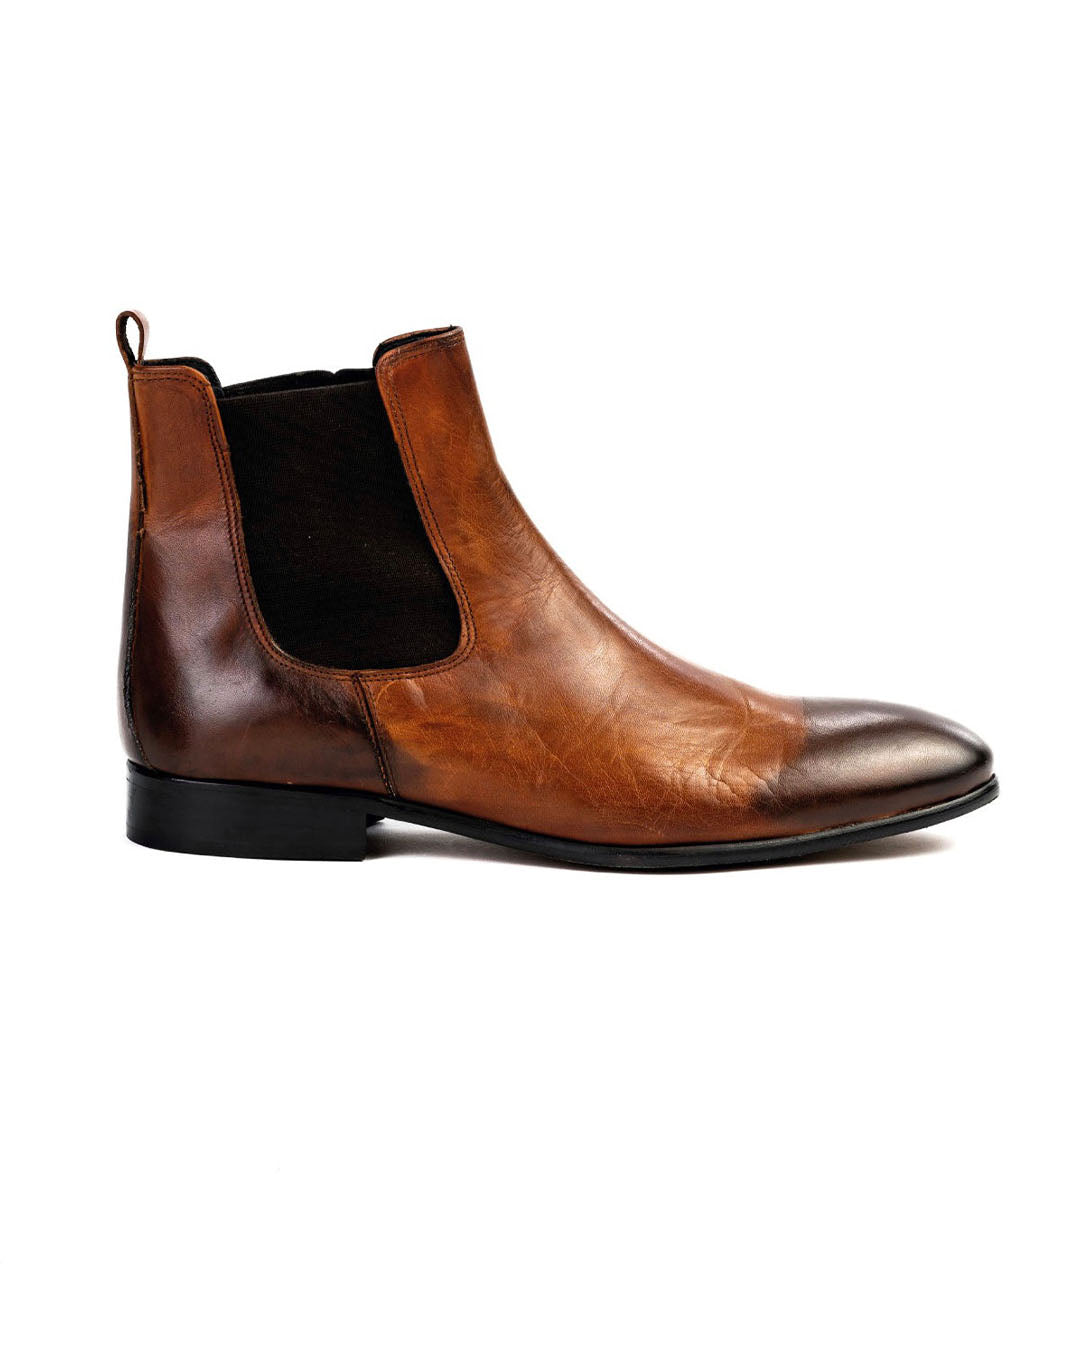 Dre - dirty brown leather chelsea boots